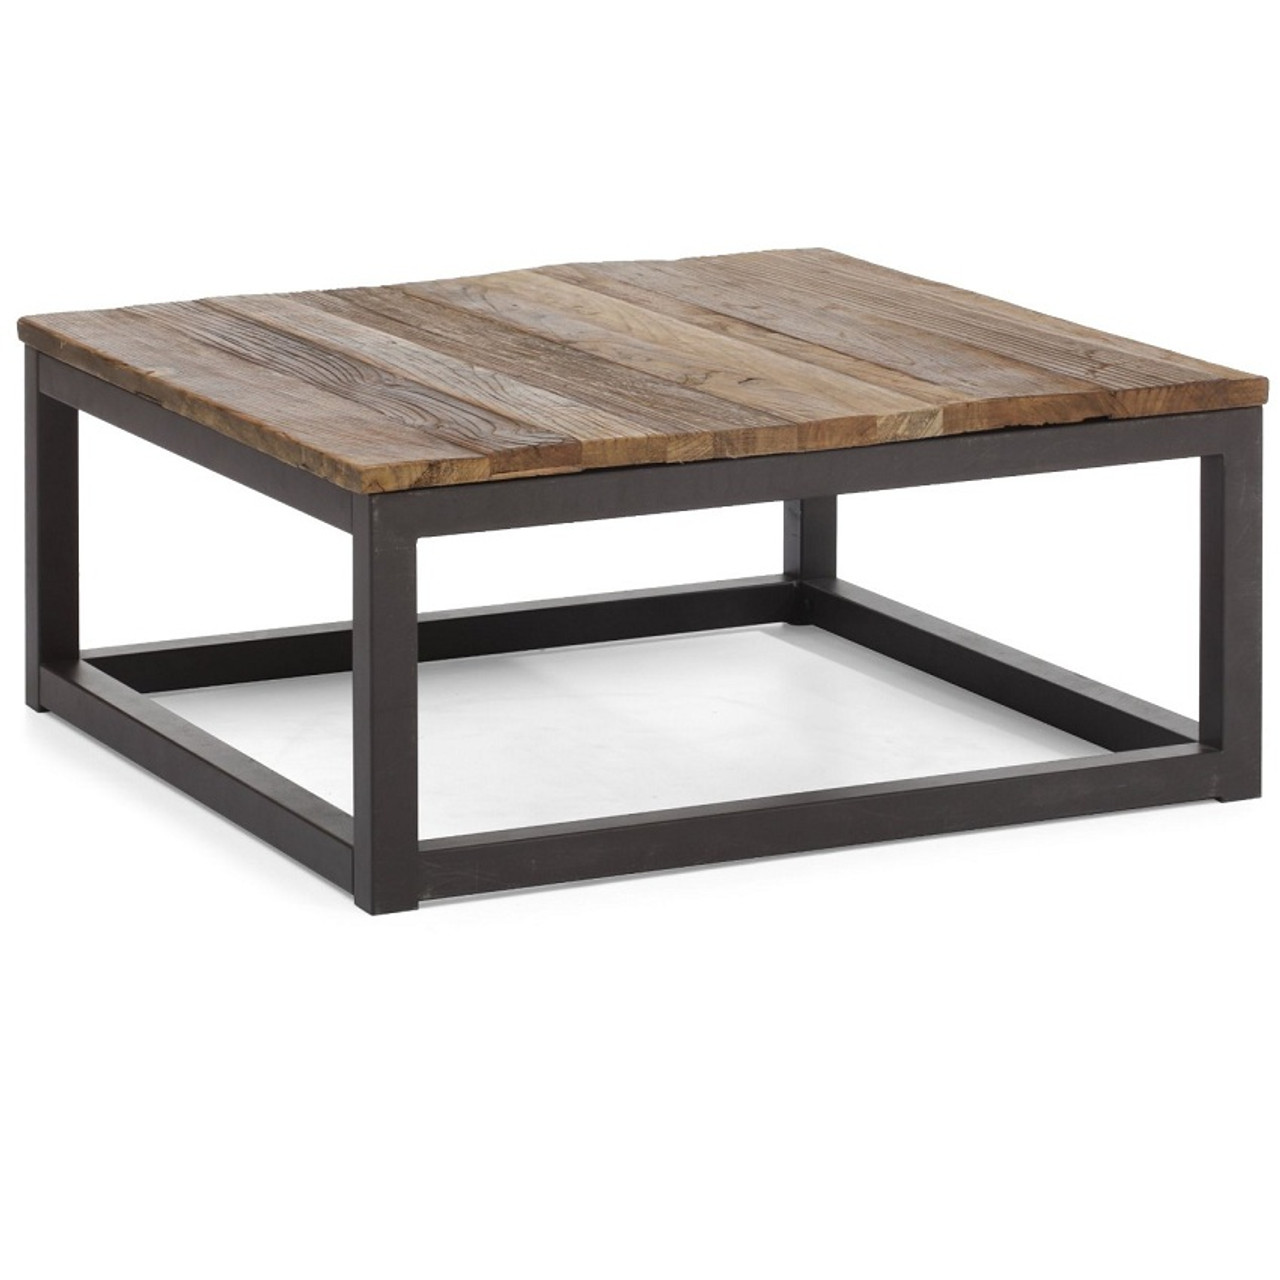 Wood And Metal Square Coffee Table  76095.1360870548 ?c=2&imbypass=on